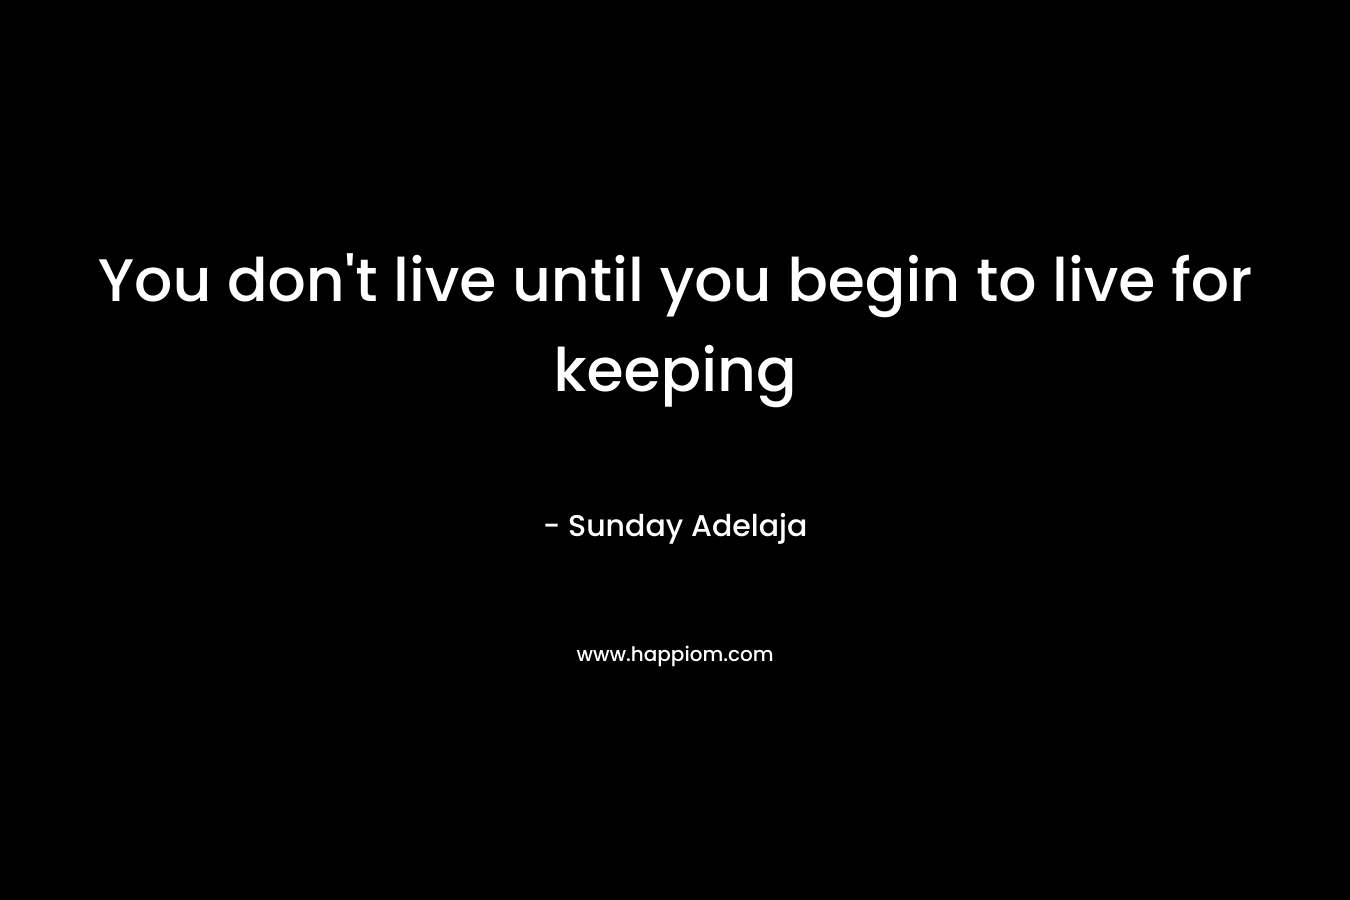 You don't live until you begin to live for keeping